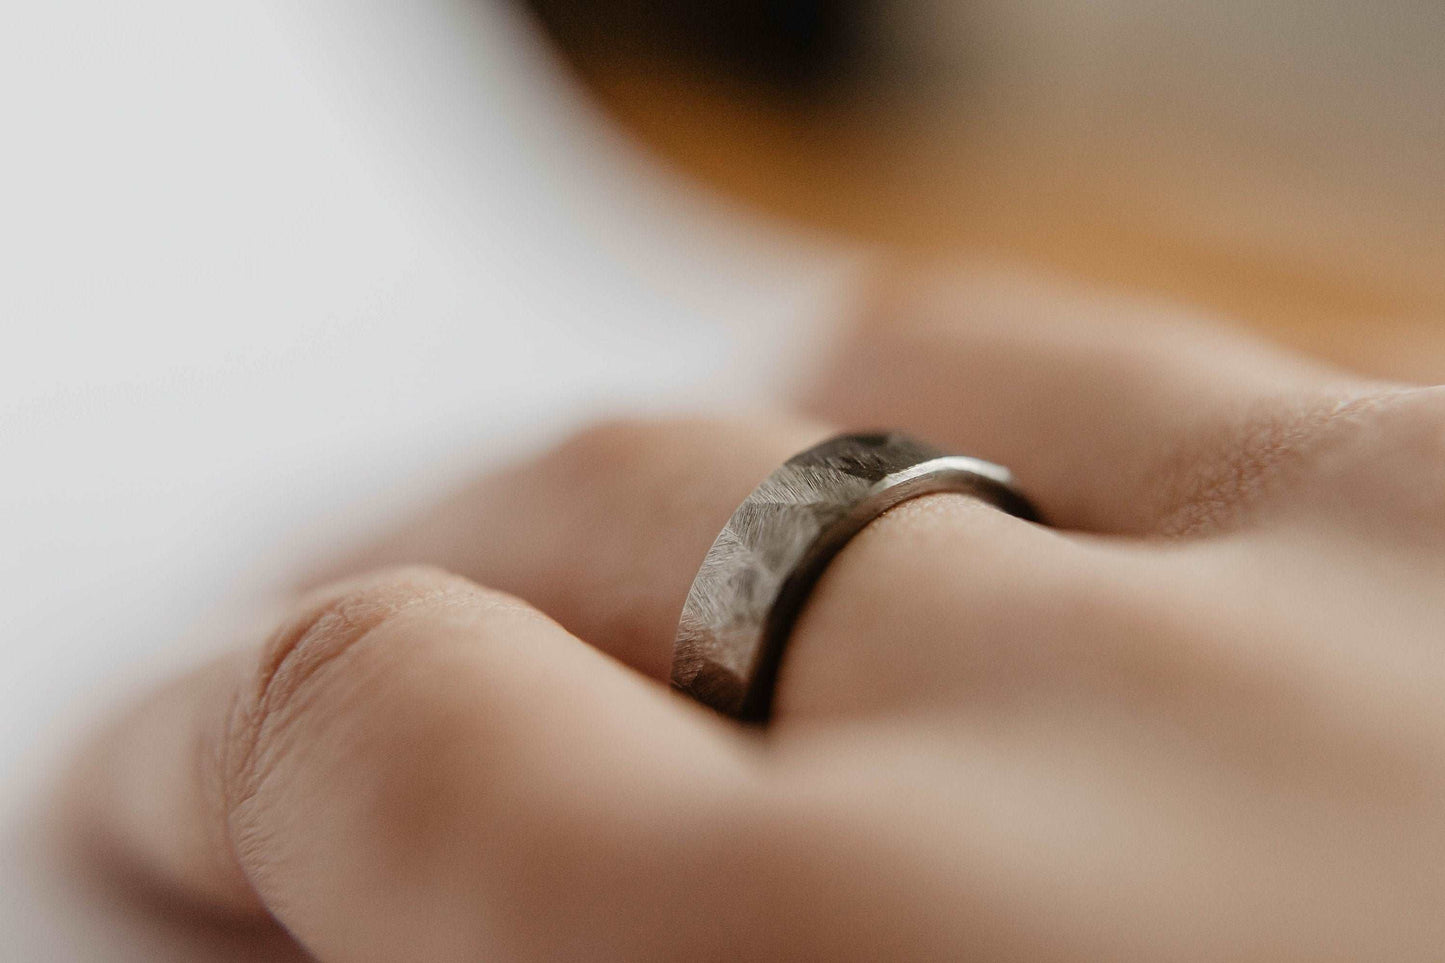 Distressed titanium wedding band. This photo shows a gritty faceted gray titanium ring. (Shown on finger)